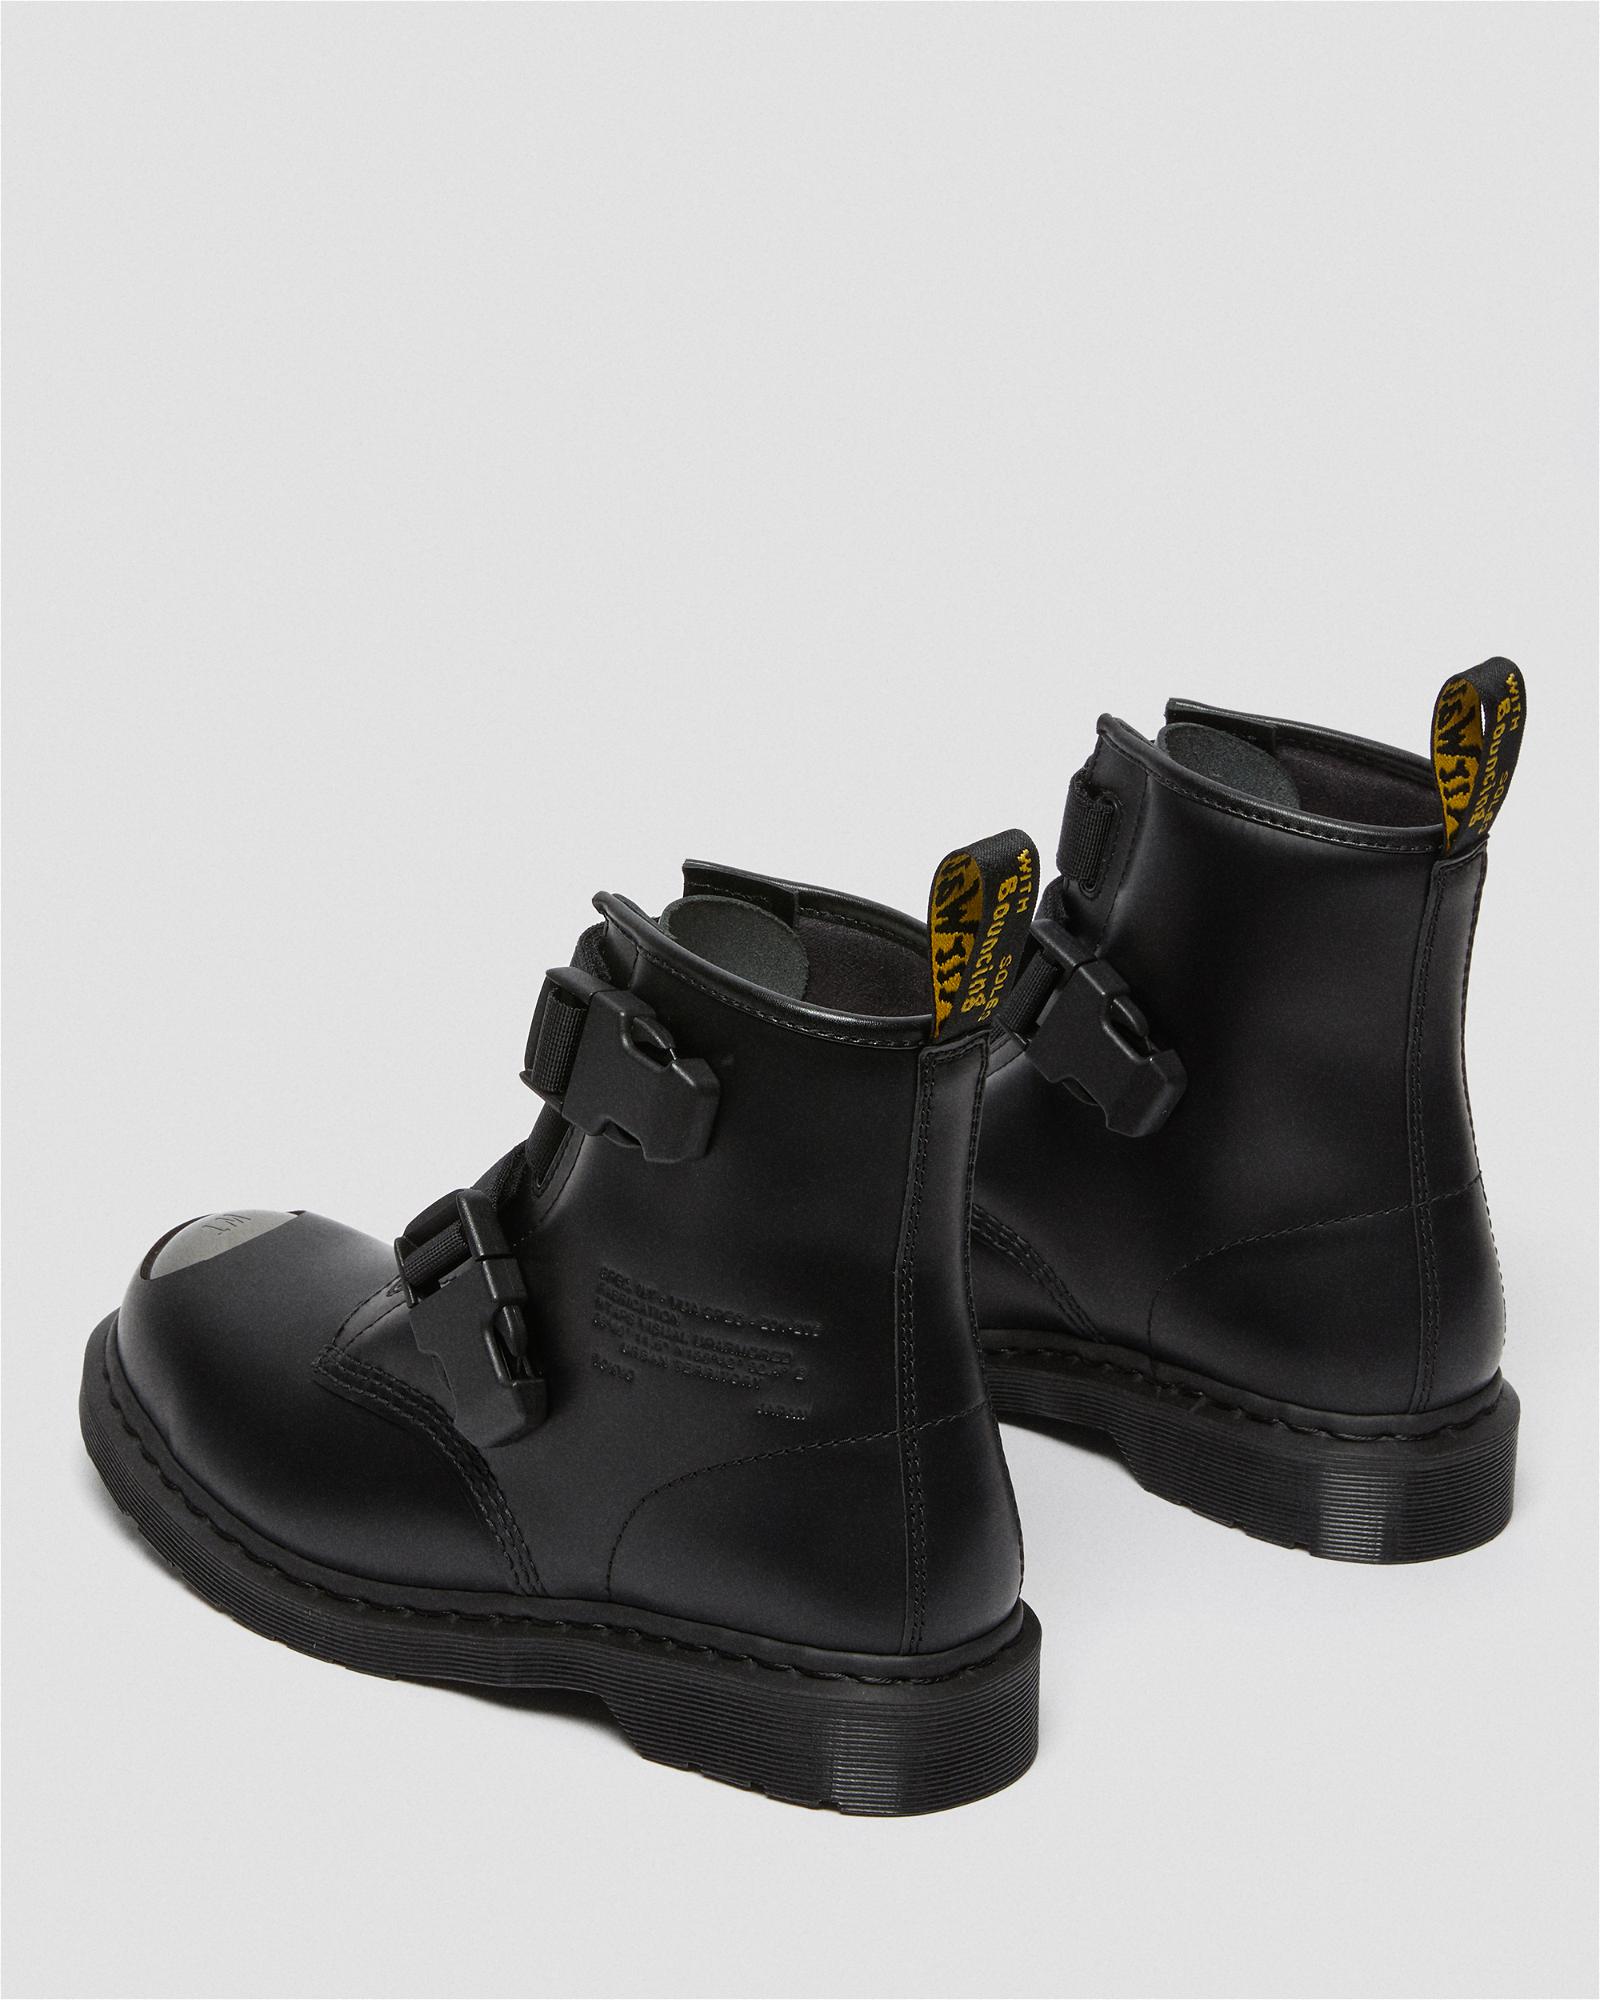 Dr. Martens x WTAPS 1460 Remastered